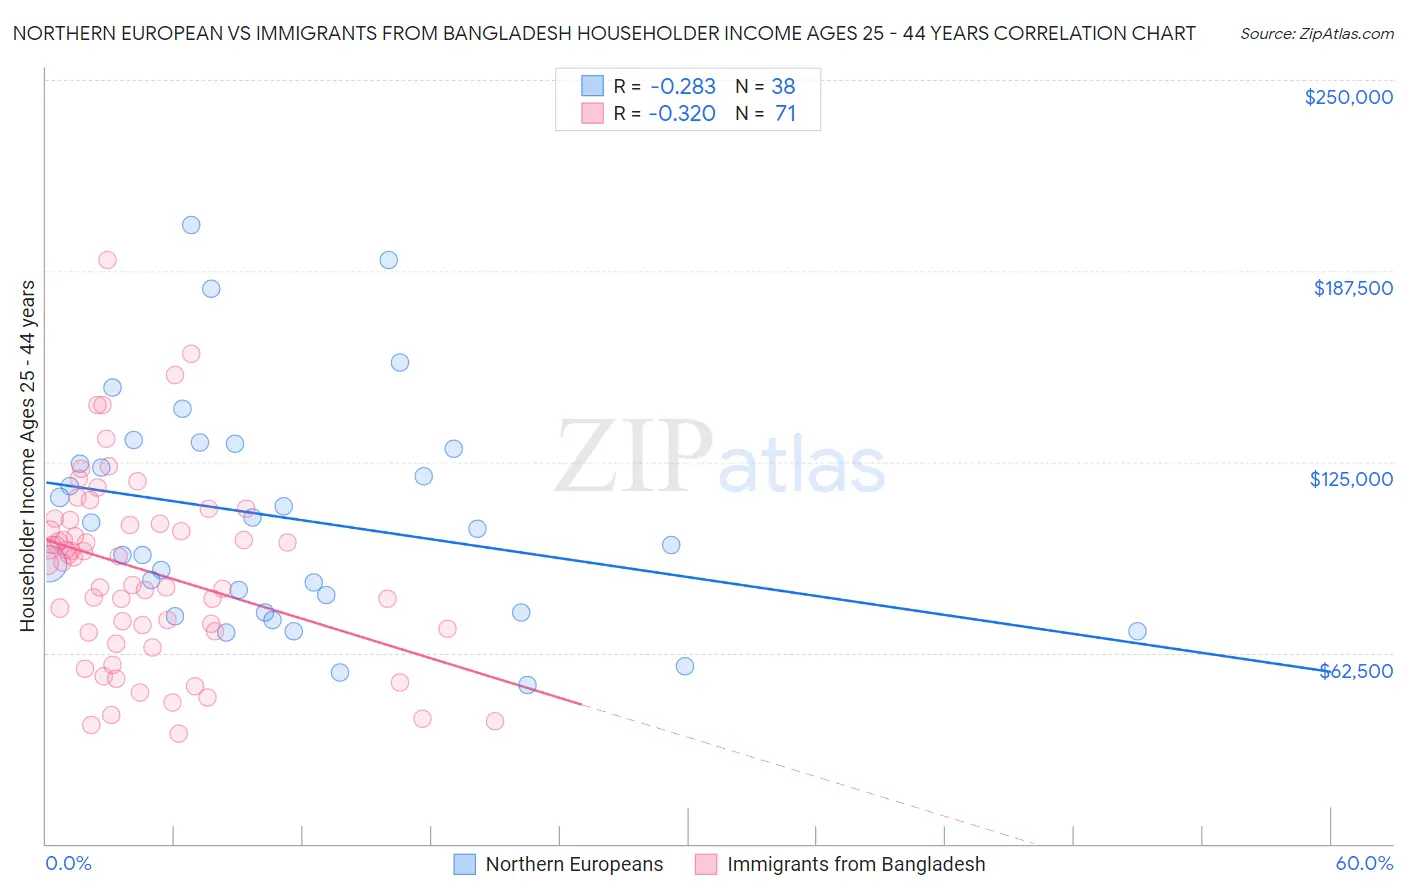 Northern European vs Immigrants from Bangladesh Householder Income Ages 25 - 44 years